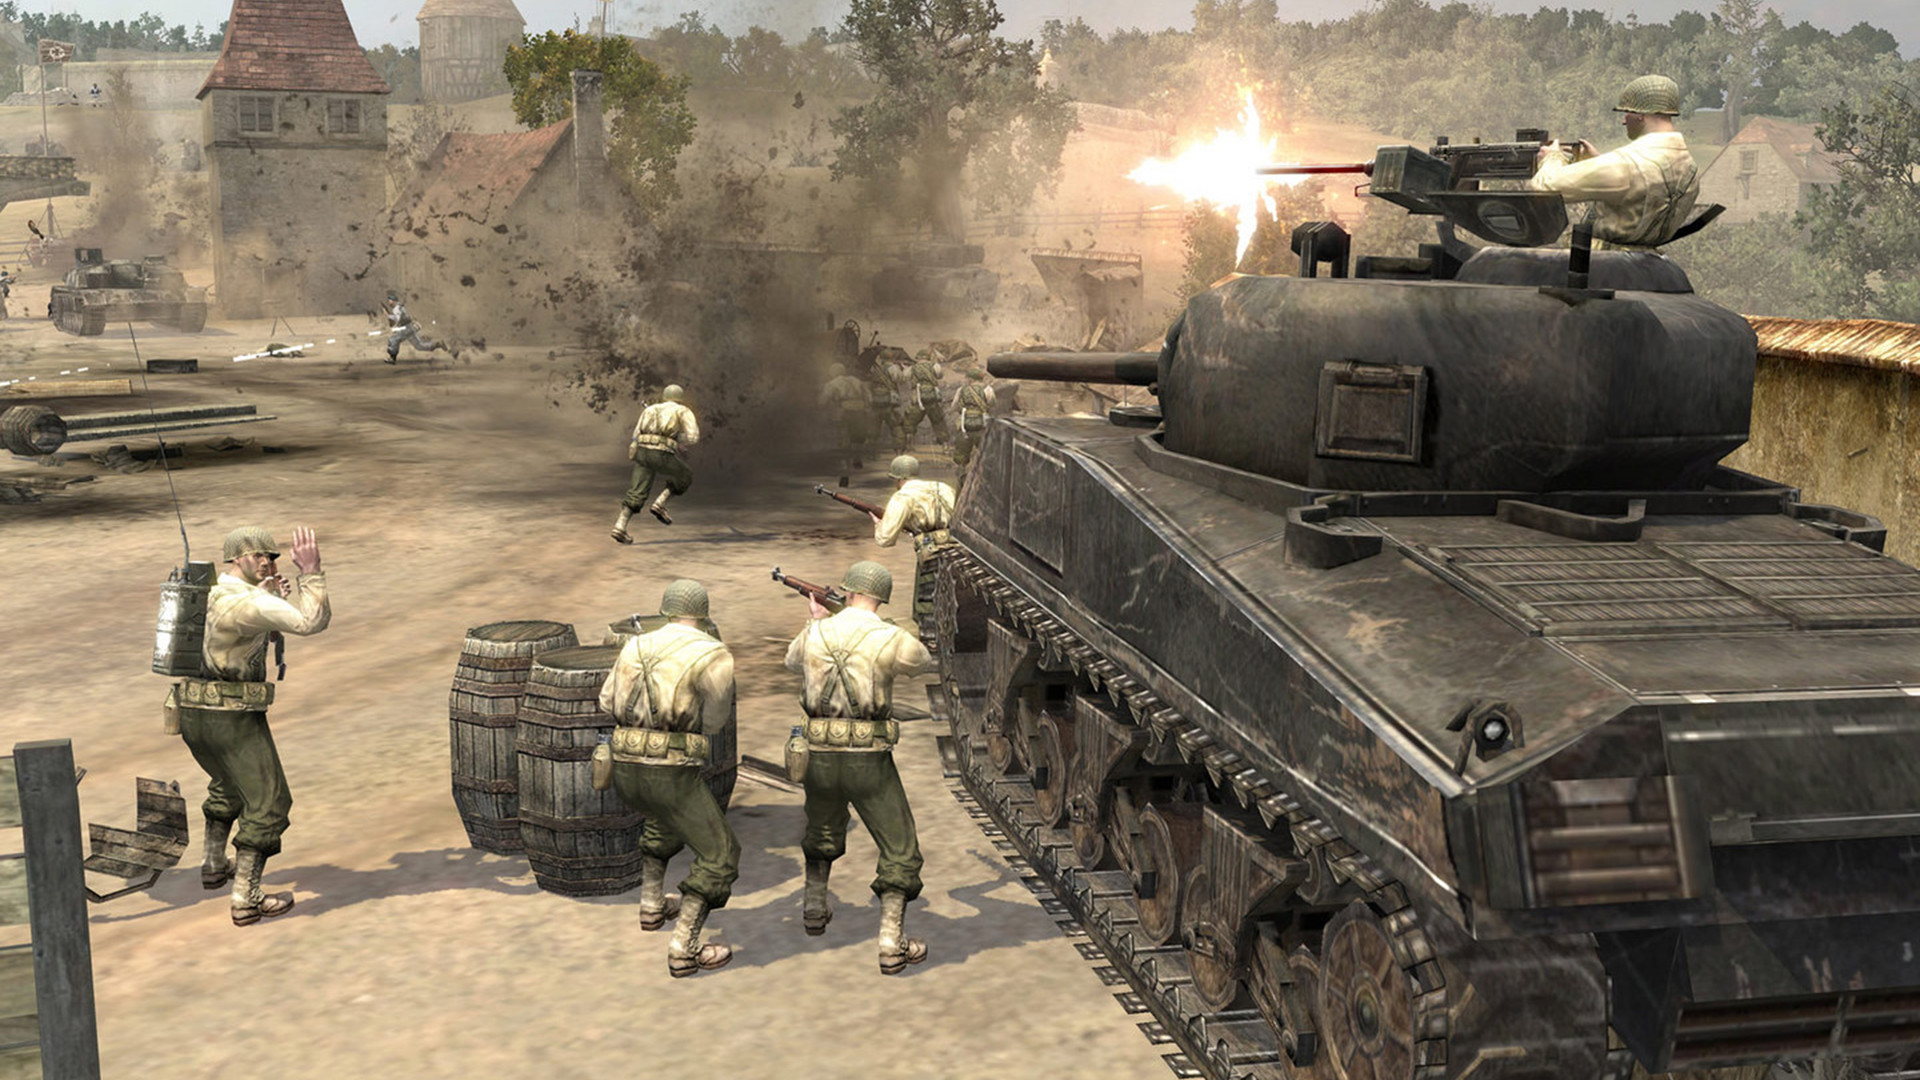 Play Simulation Games Online on PC & Mobile (FREE)